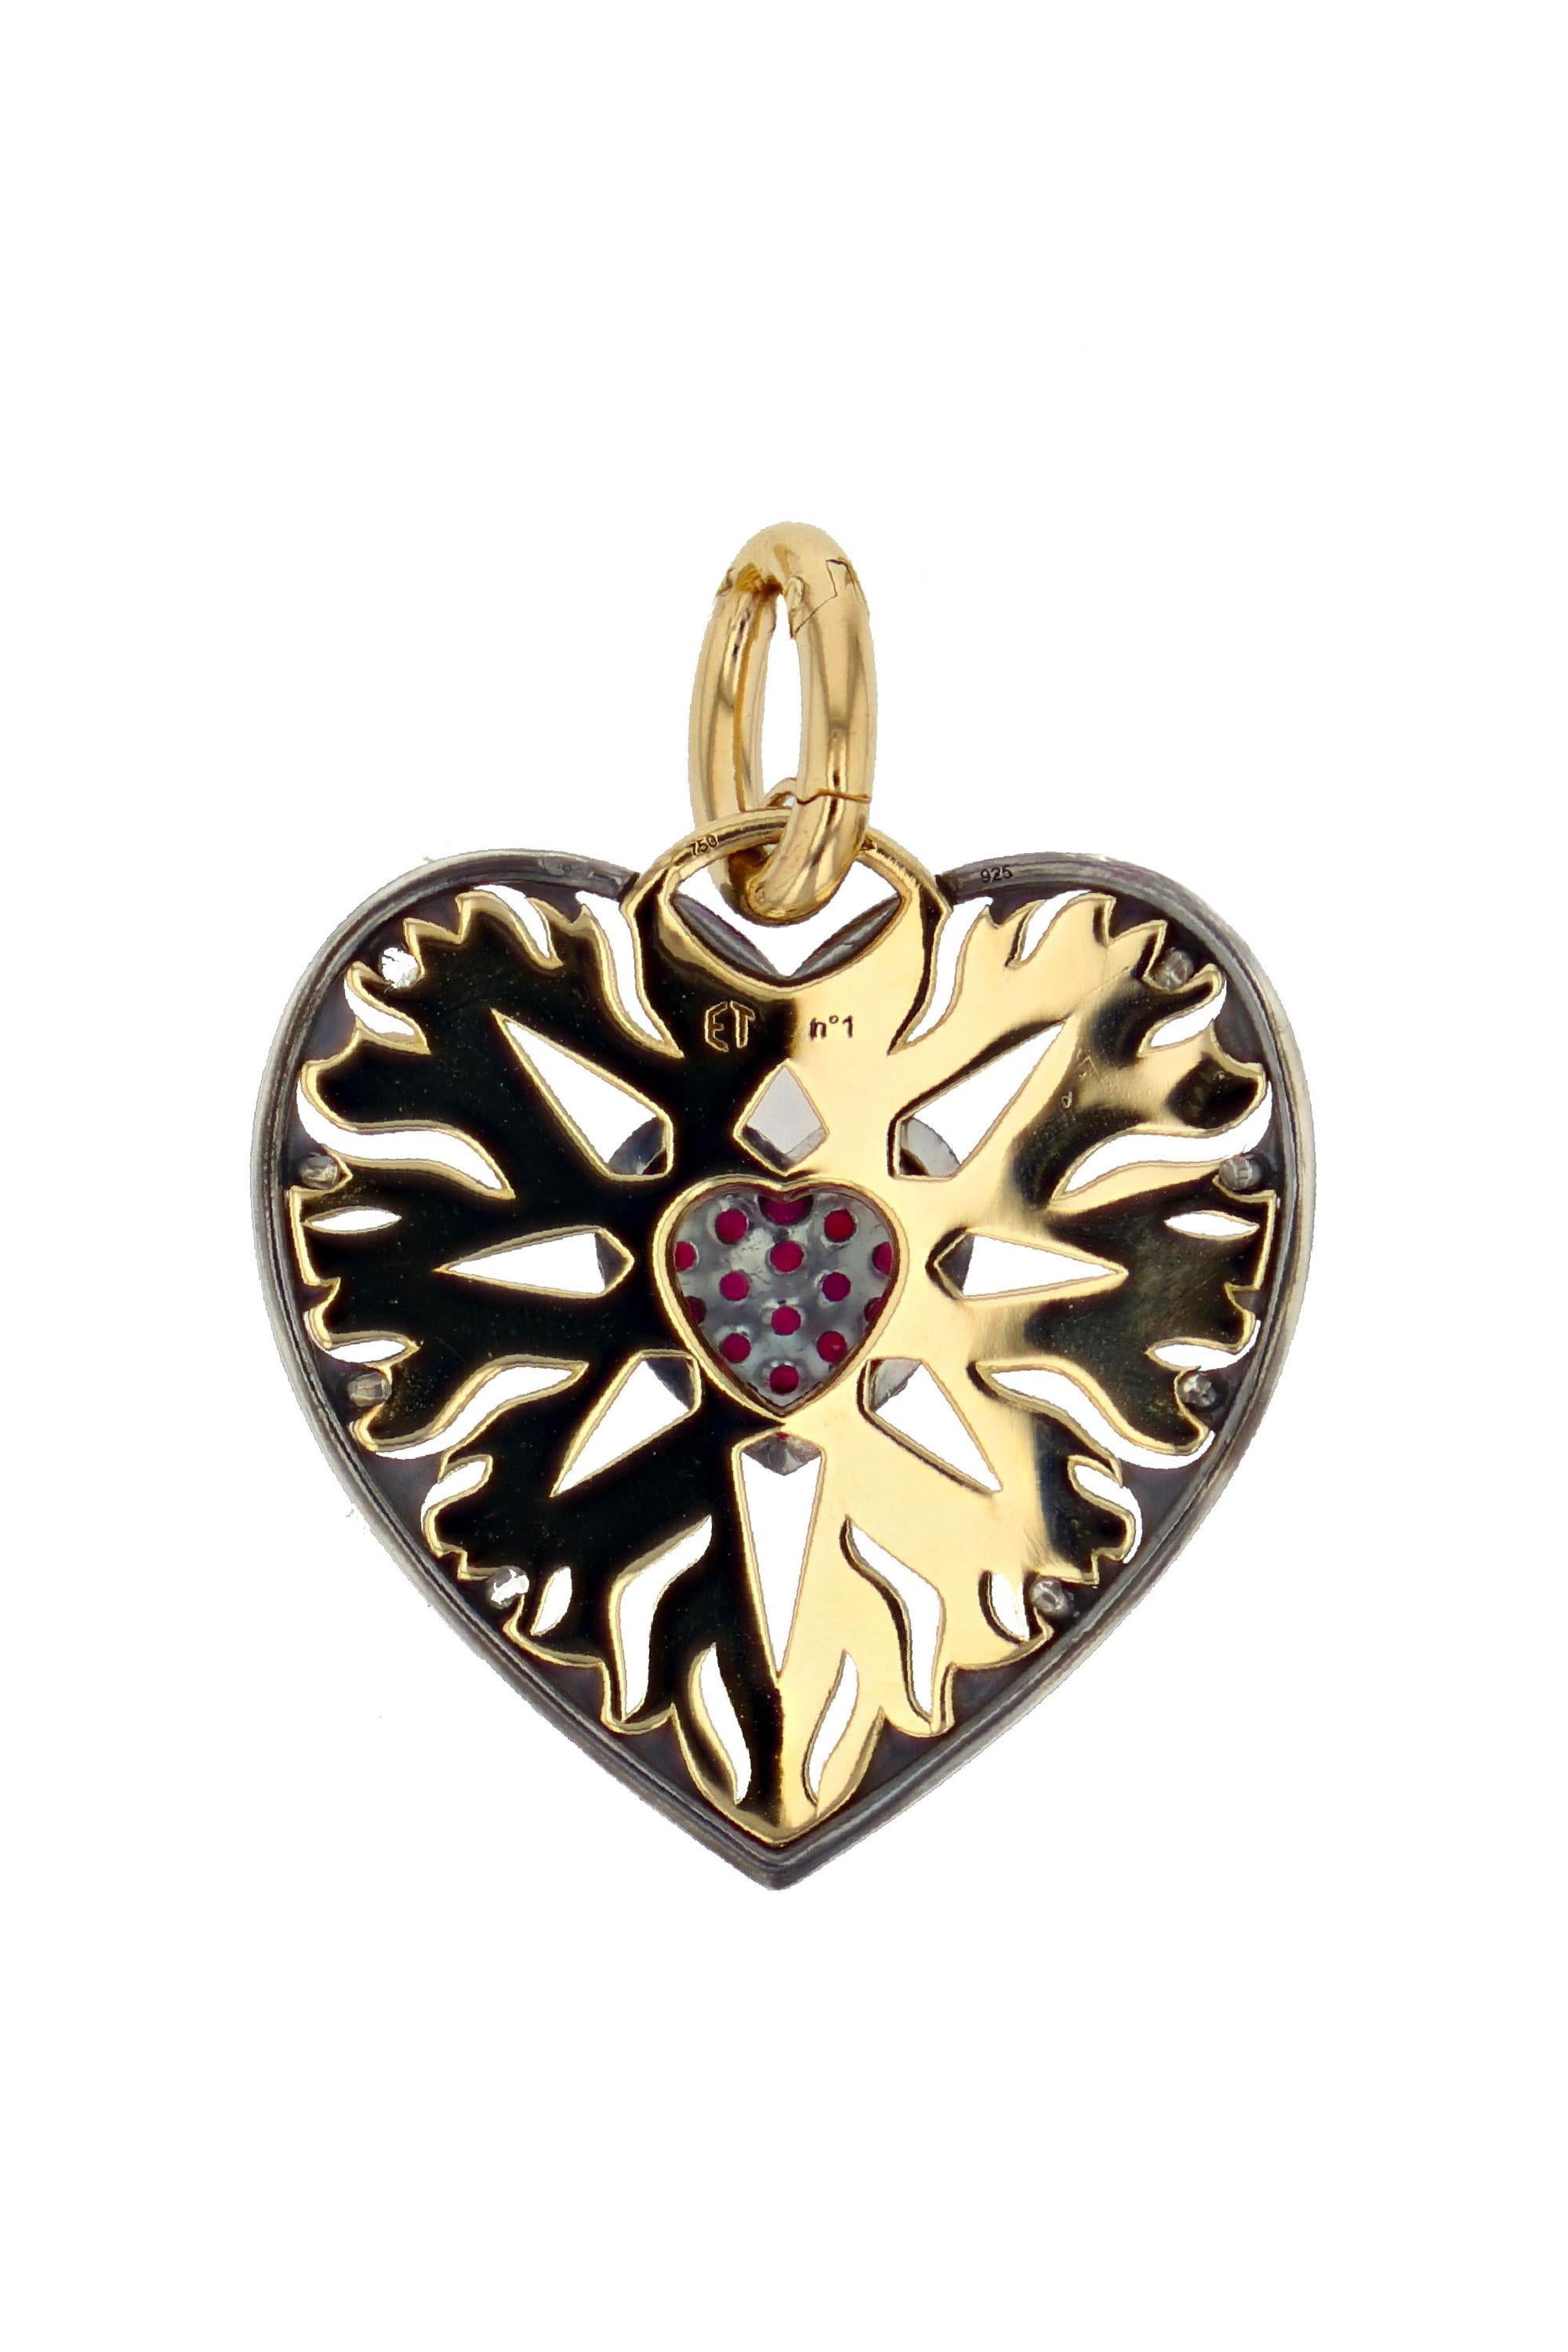 Cushion Cut Cosmogonie Secrète Ruby Heart Charm in 18k Yellow Gold by Elie Top For Sale